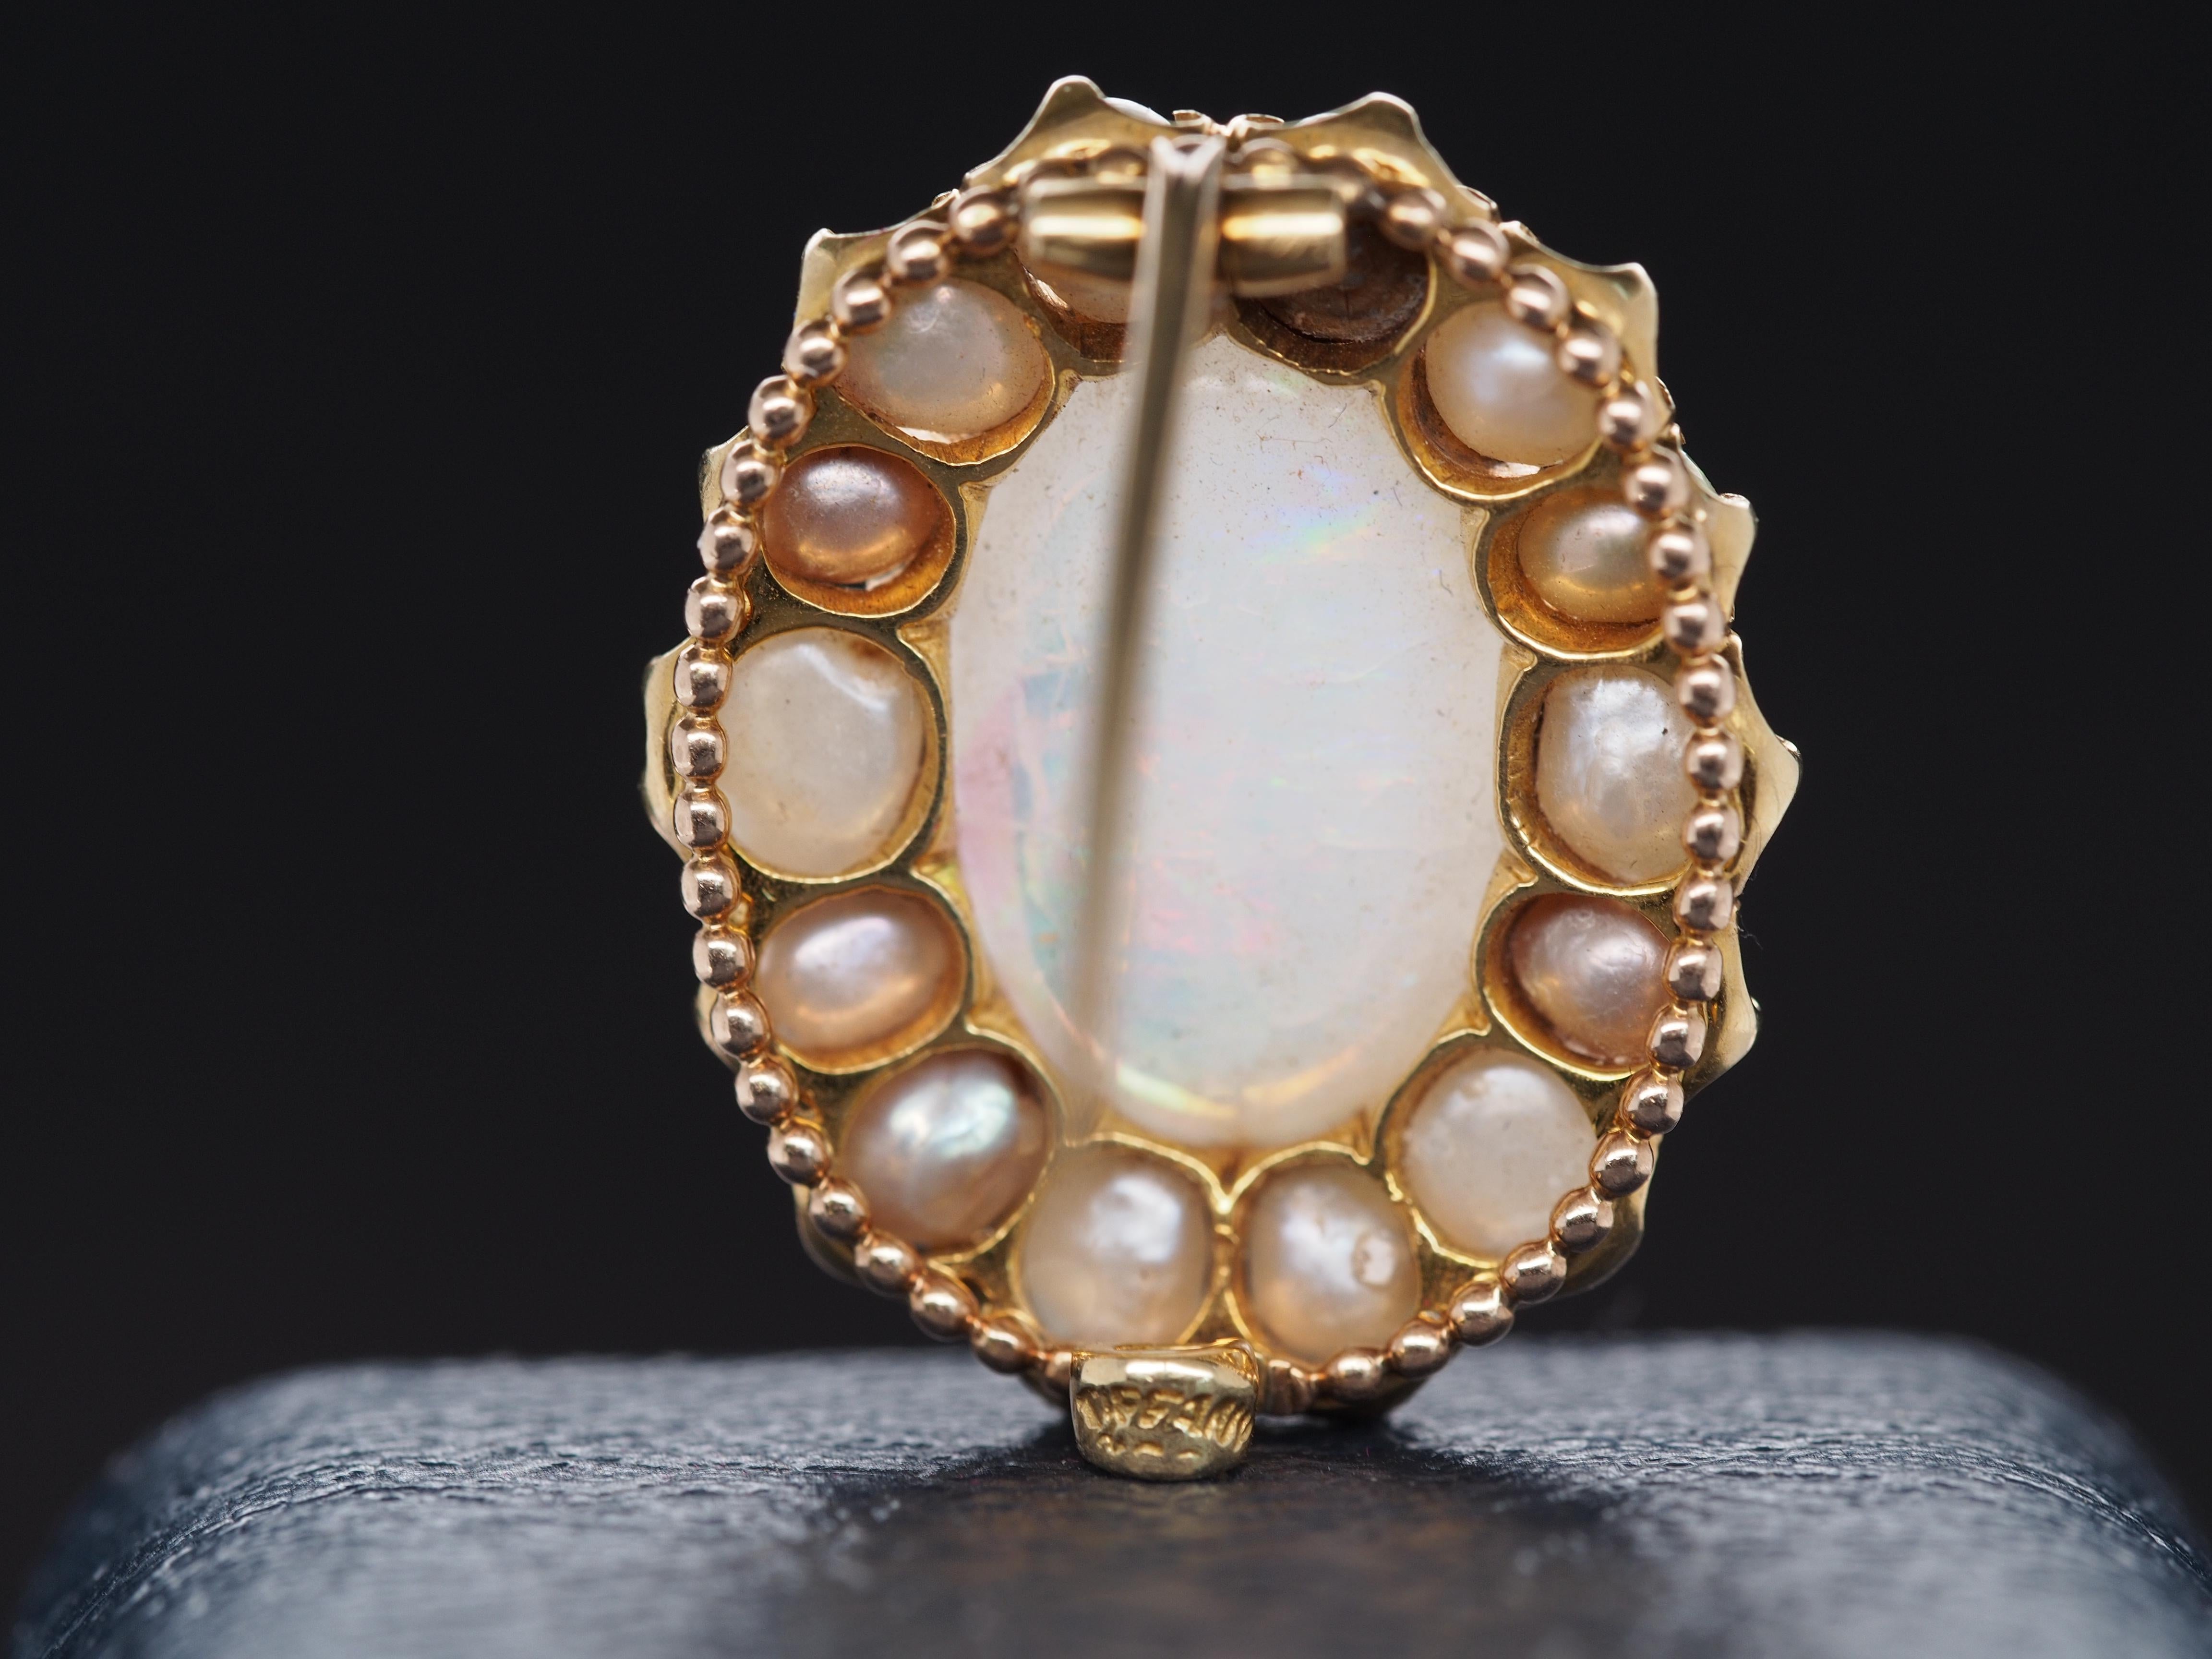 20k Yellow Gold Tiffany & Co Pearl and Opal Brooch, circa 1900s In Good Condition For Sale In Atlanta, GA